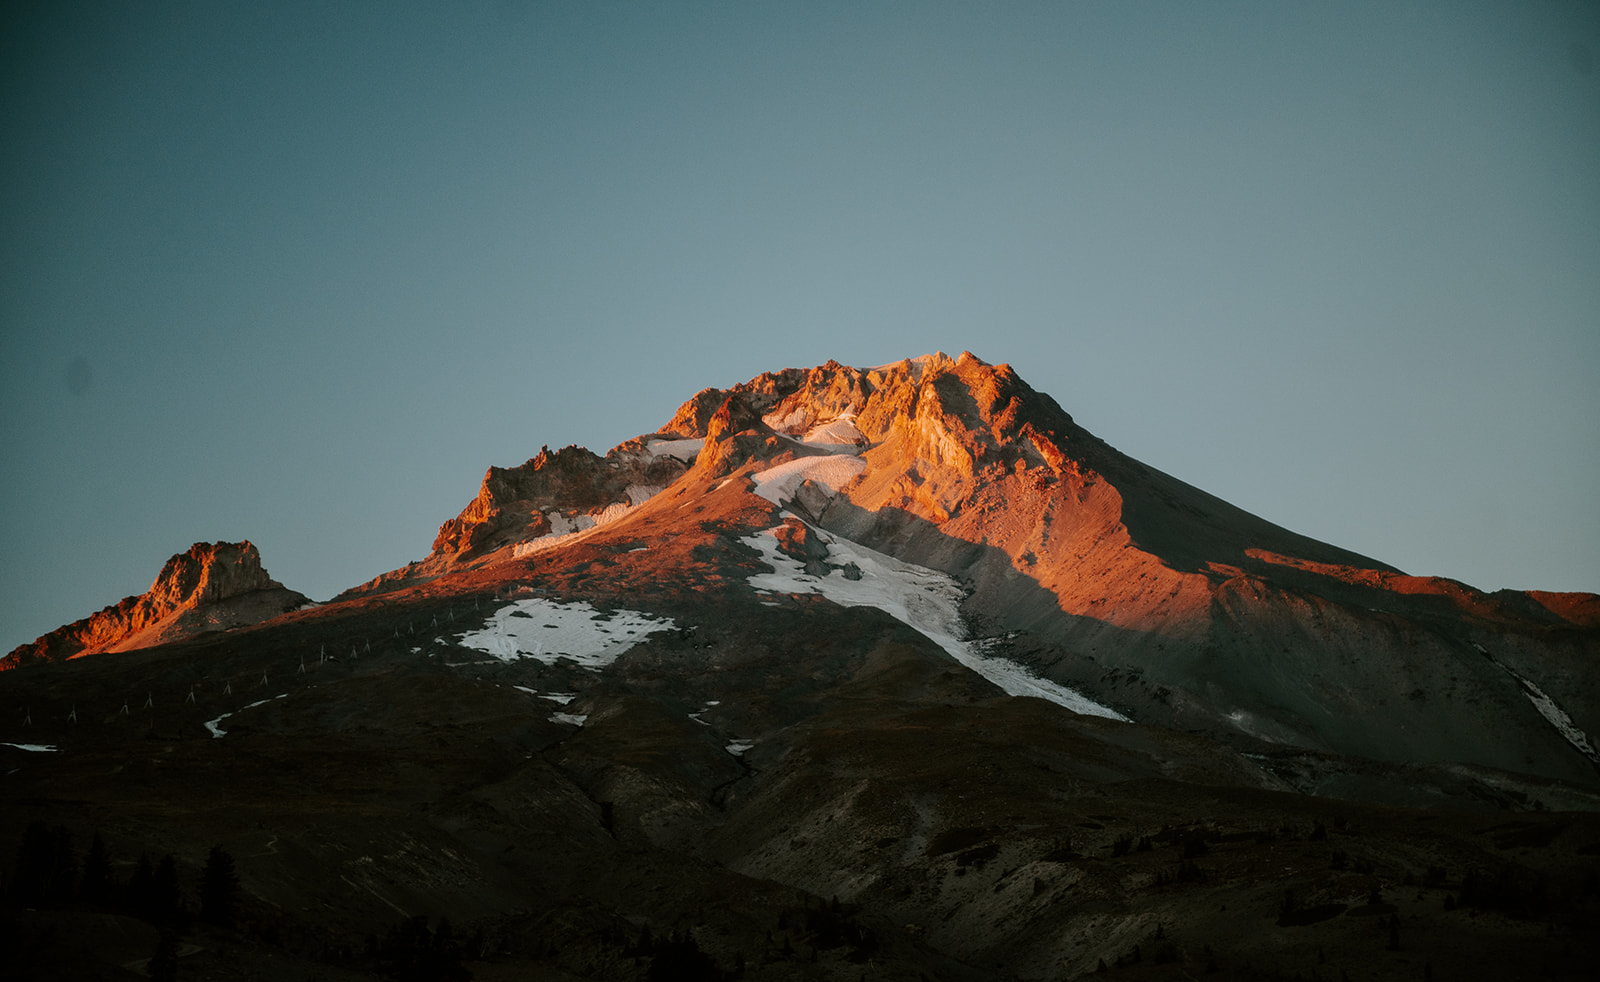 Mt. Hood at Sunset from timberline lodge